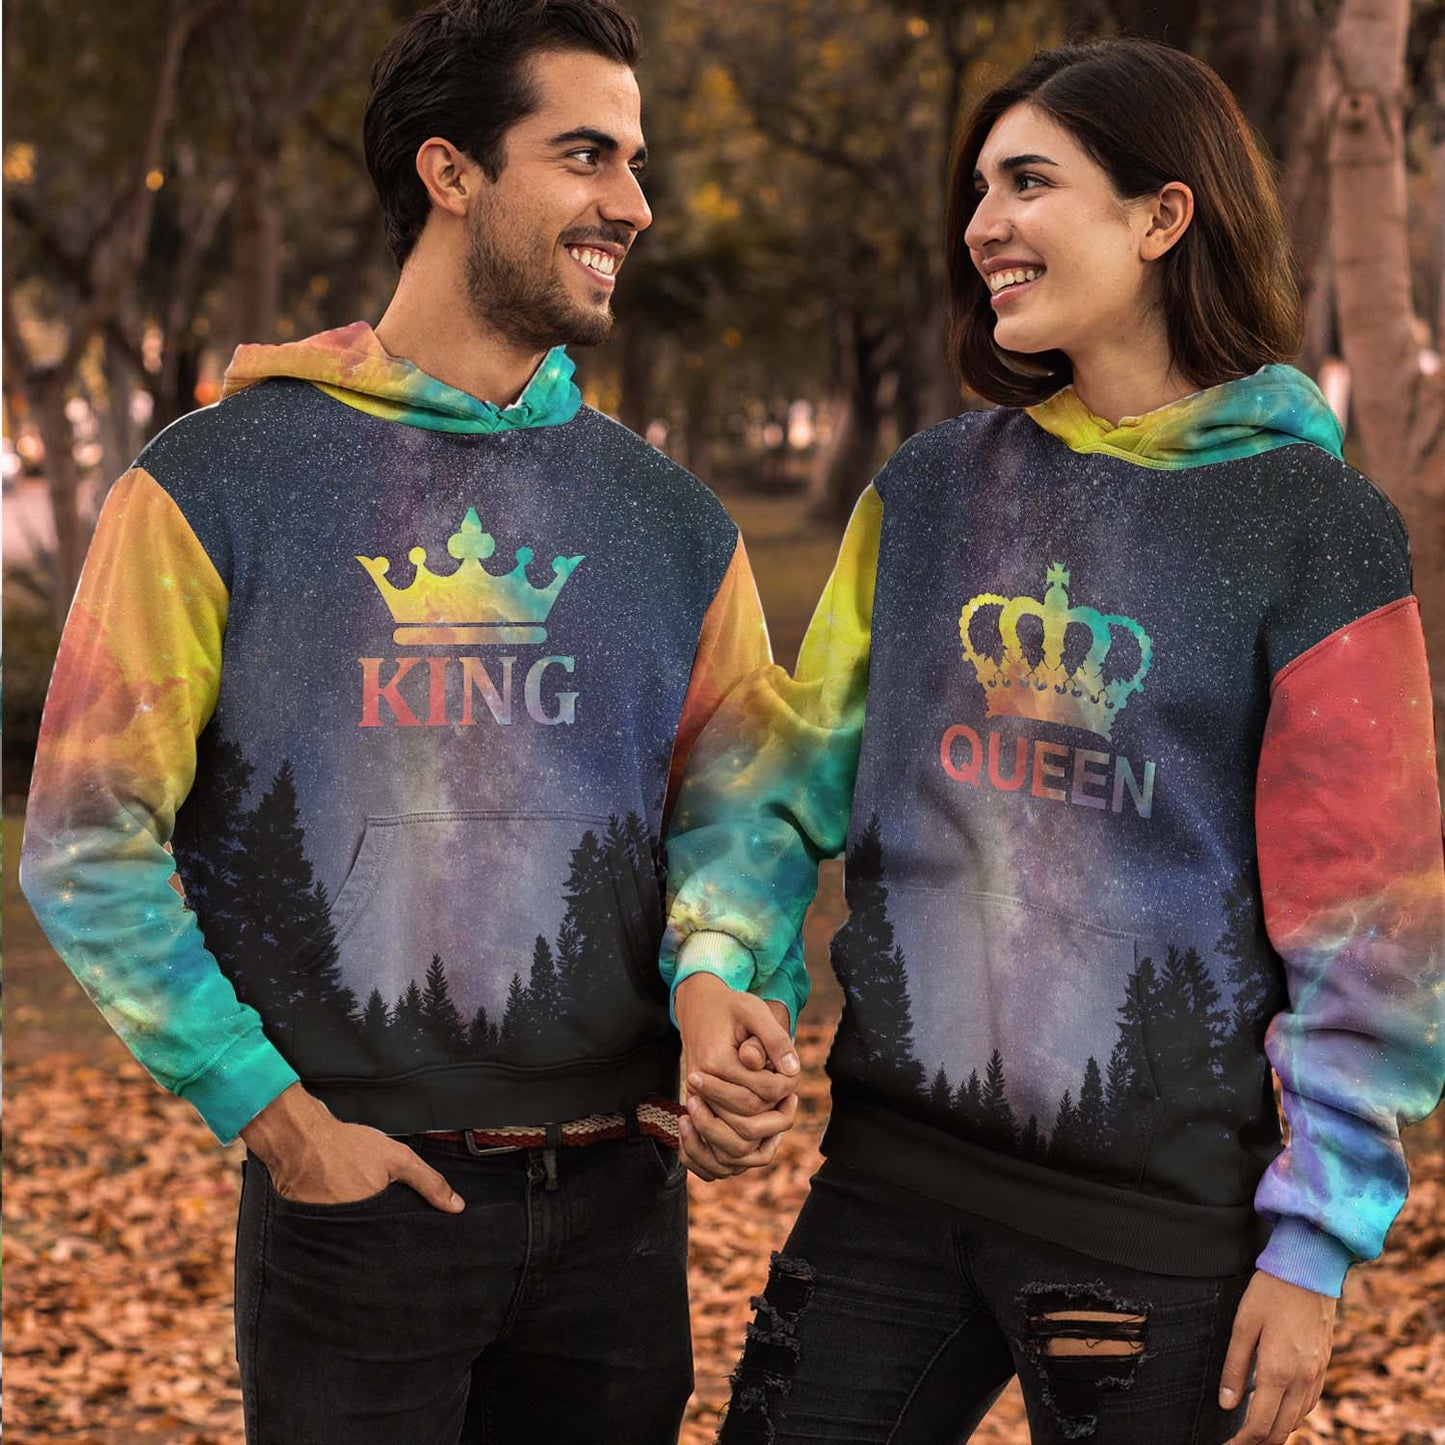 Matching 3D All Over Print Hoodie King And Queen 2 Personalizedwitch For Couple